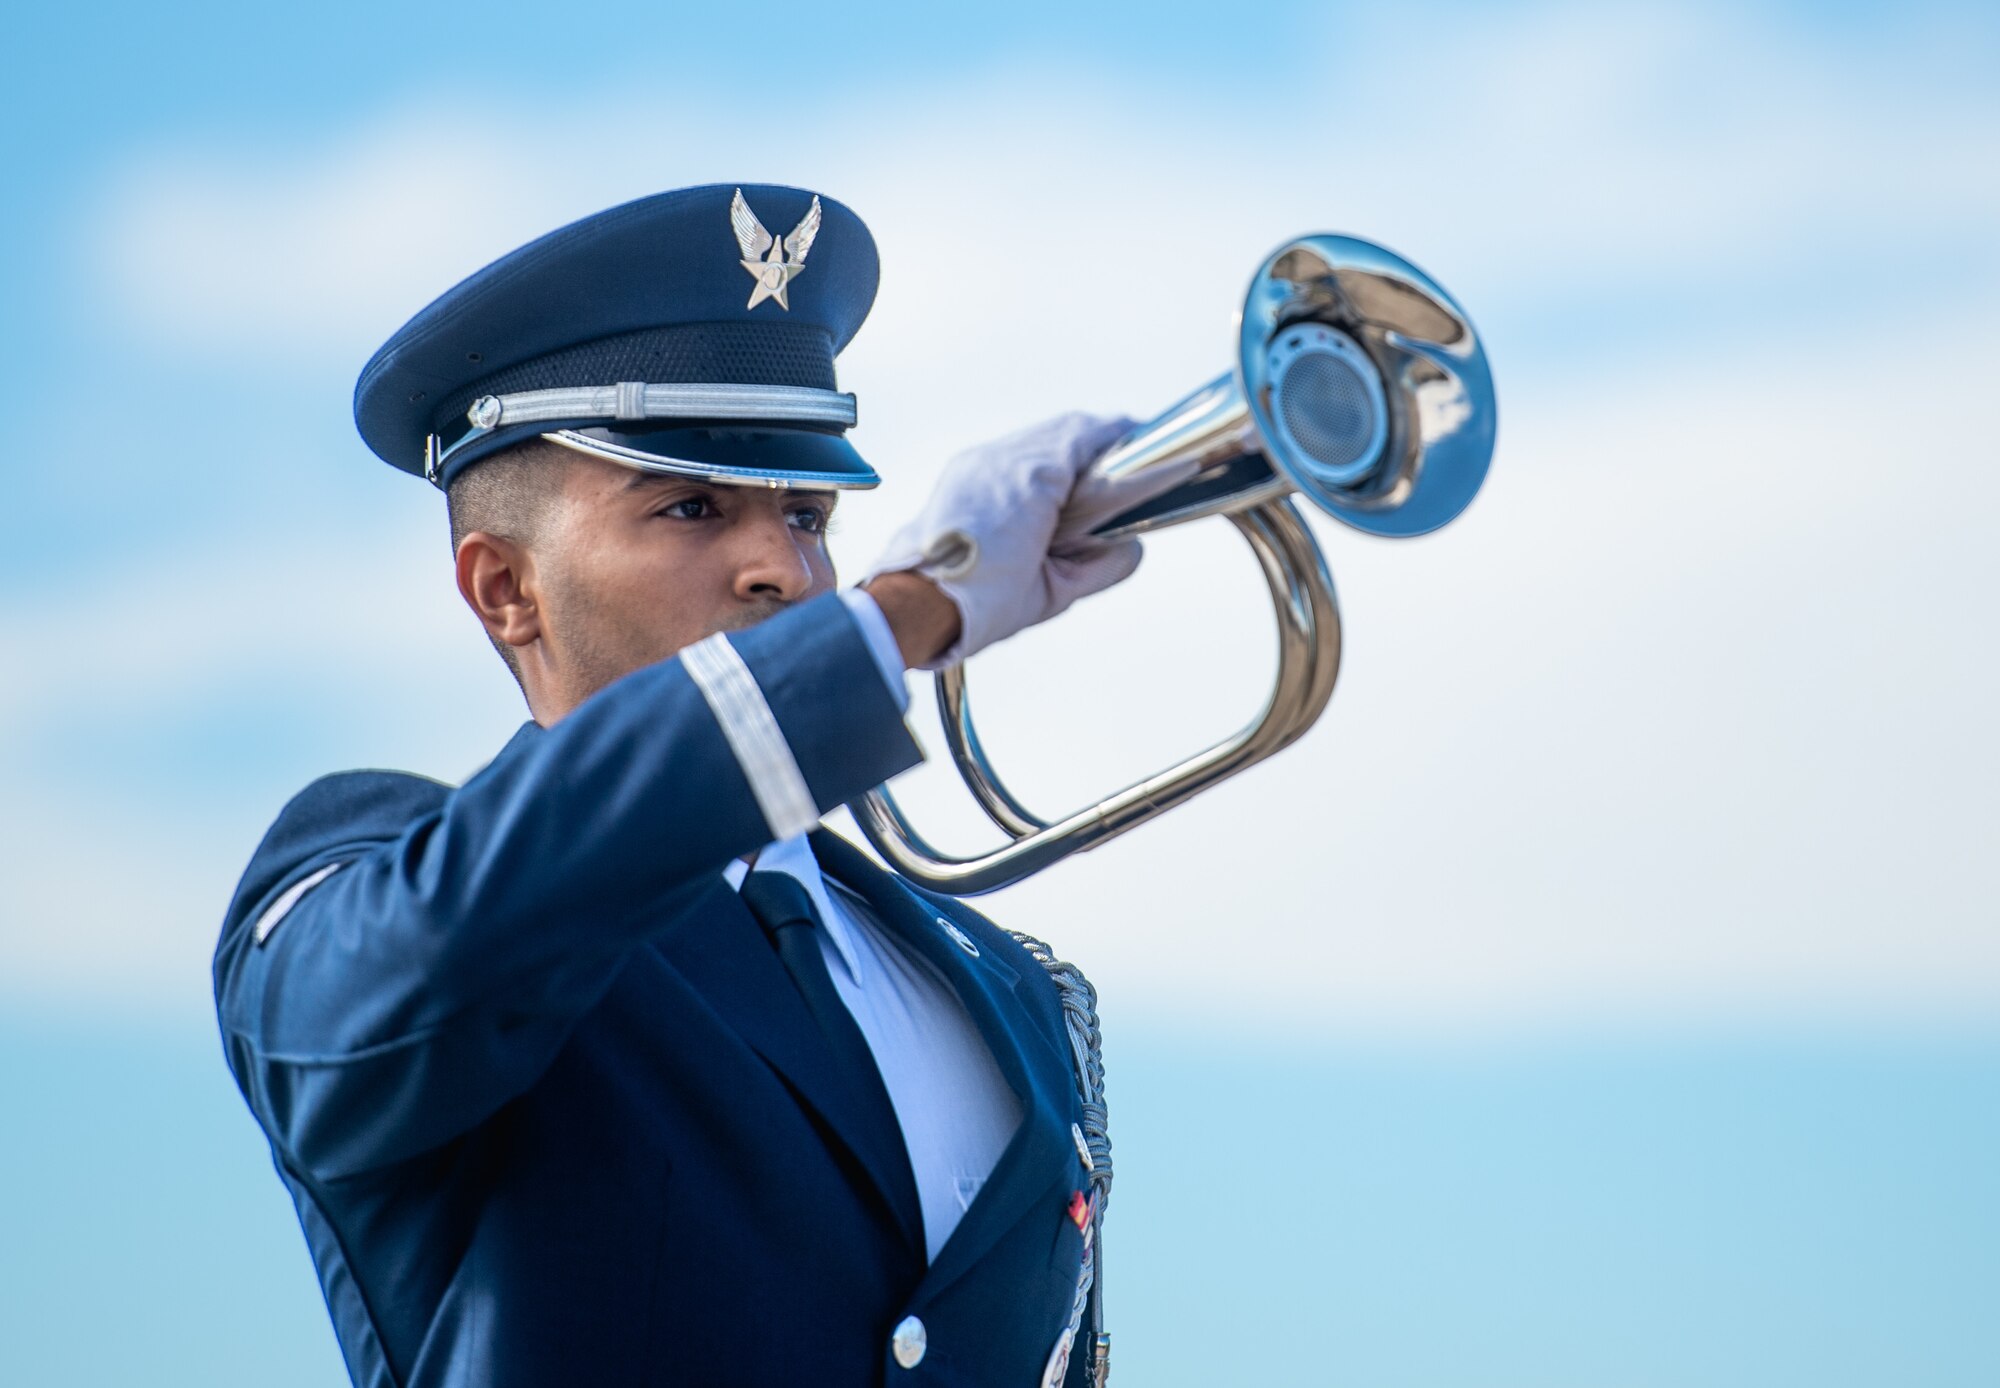 A Luke Air Force Base honor guardsman plays Taps during a memorial service for Capt. Stephen “Trip” Grace Dec. 7, 2018, at Luke Air Force Base, Ariz. Airmen from across Luke paused to honor and celebrate the life of Capt. Grace. (U.S. Air Force photo by Senior Airman Alexander Cook)